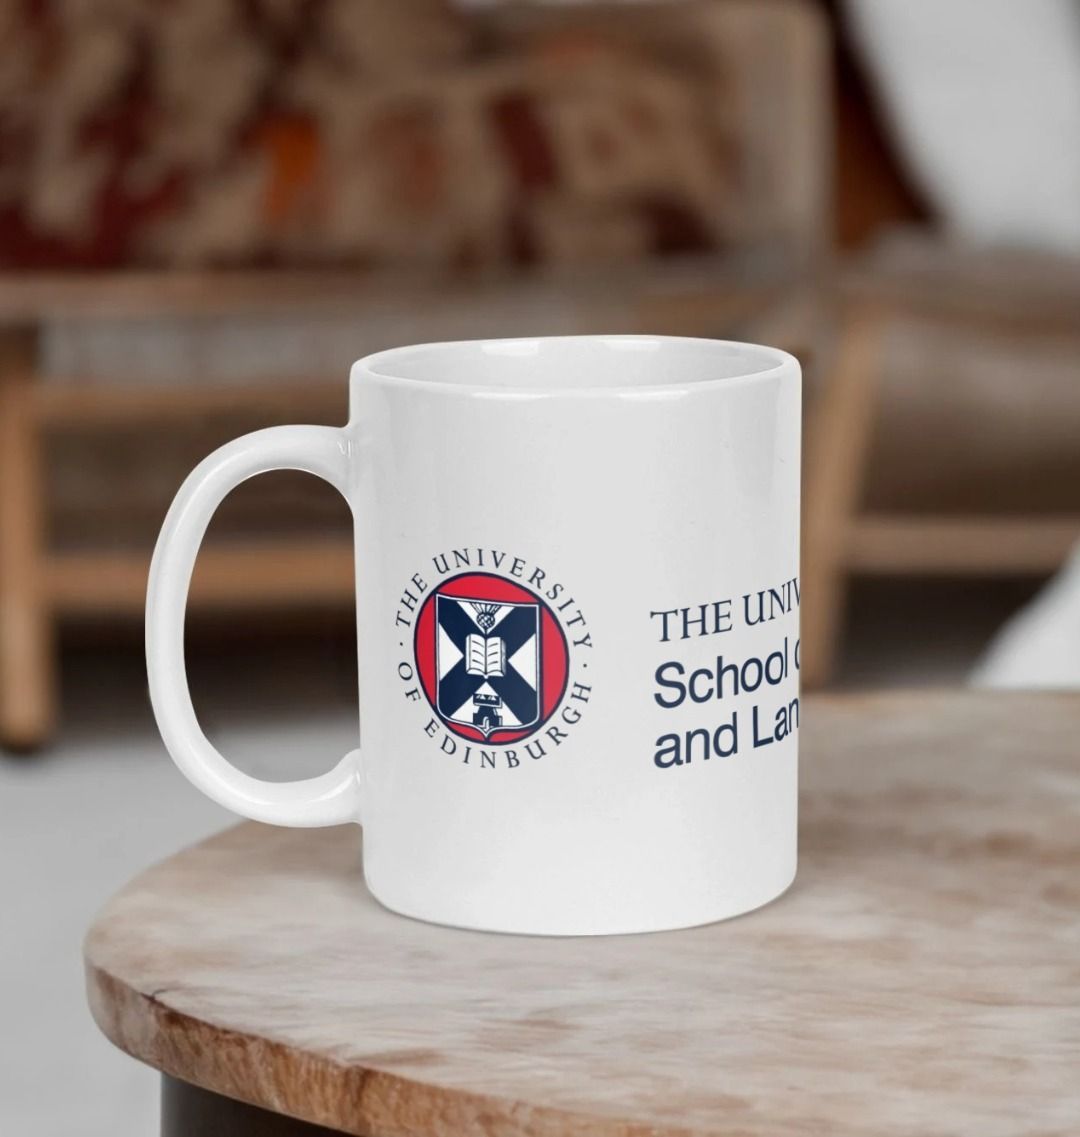 White School of Philosophy, Psychology and Language Sciences Mug with multi-colour printed University crest and logo